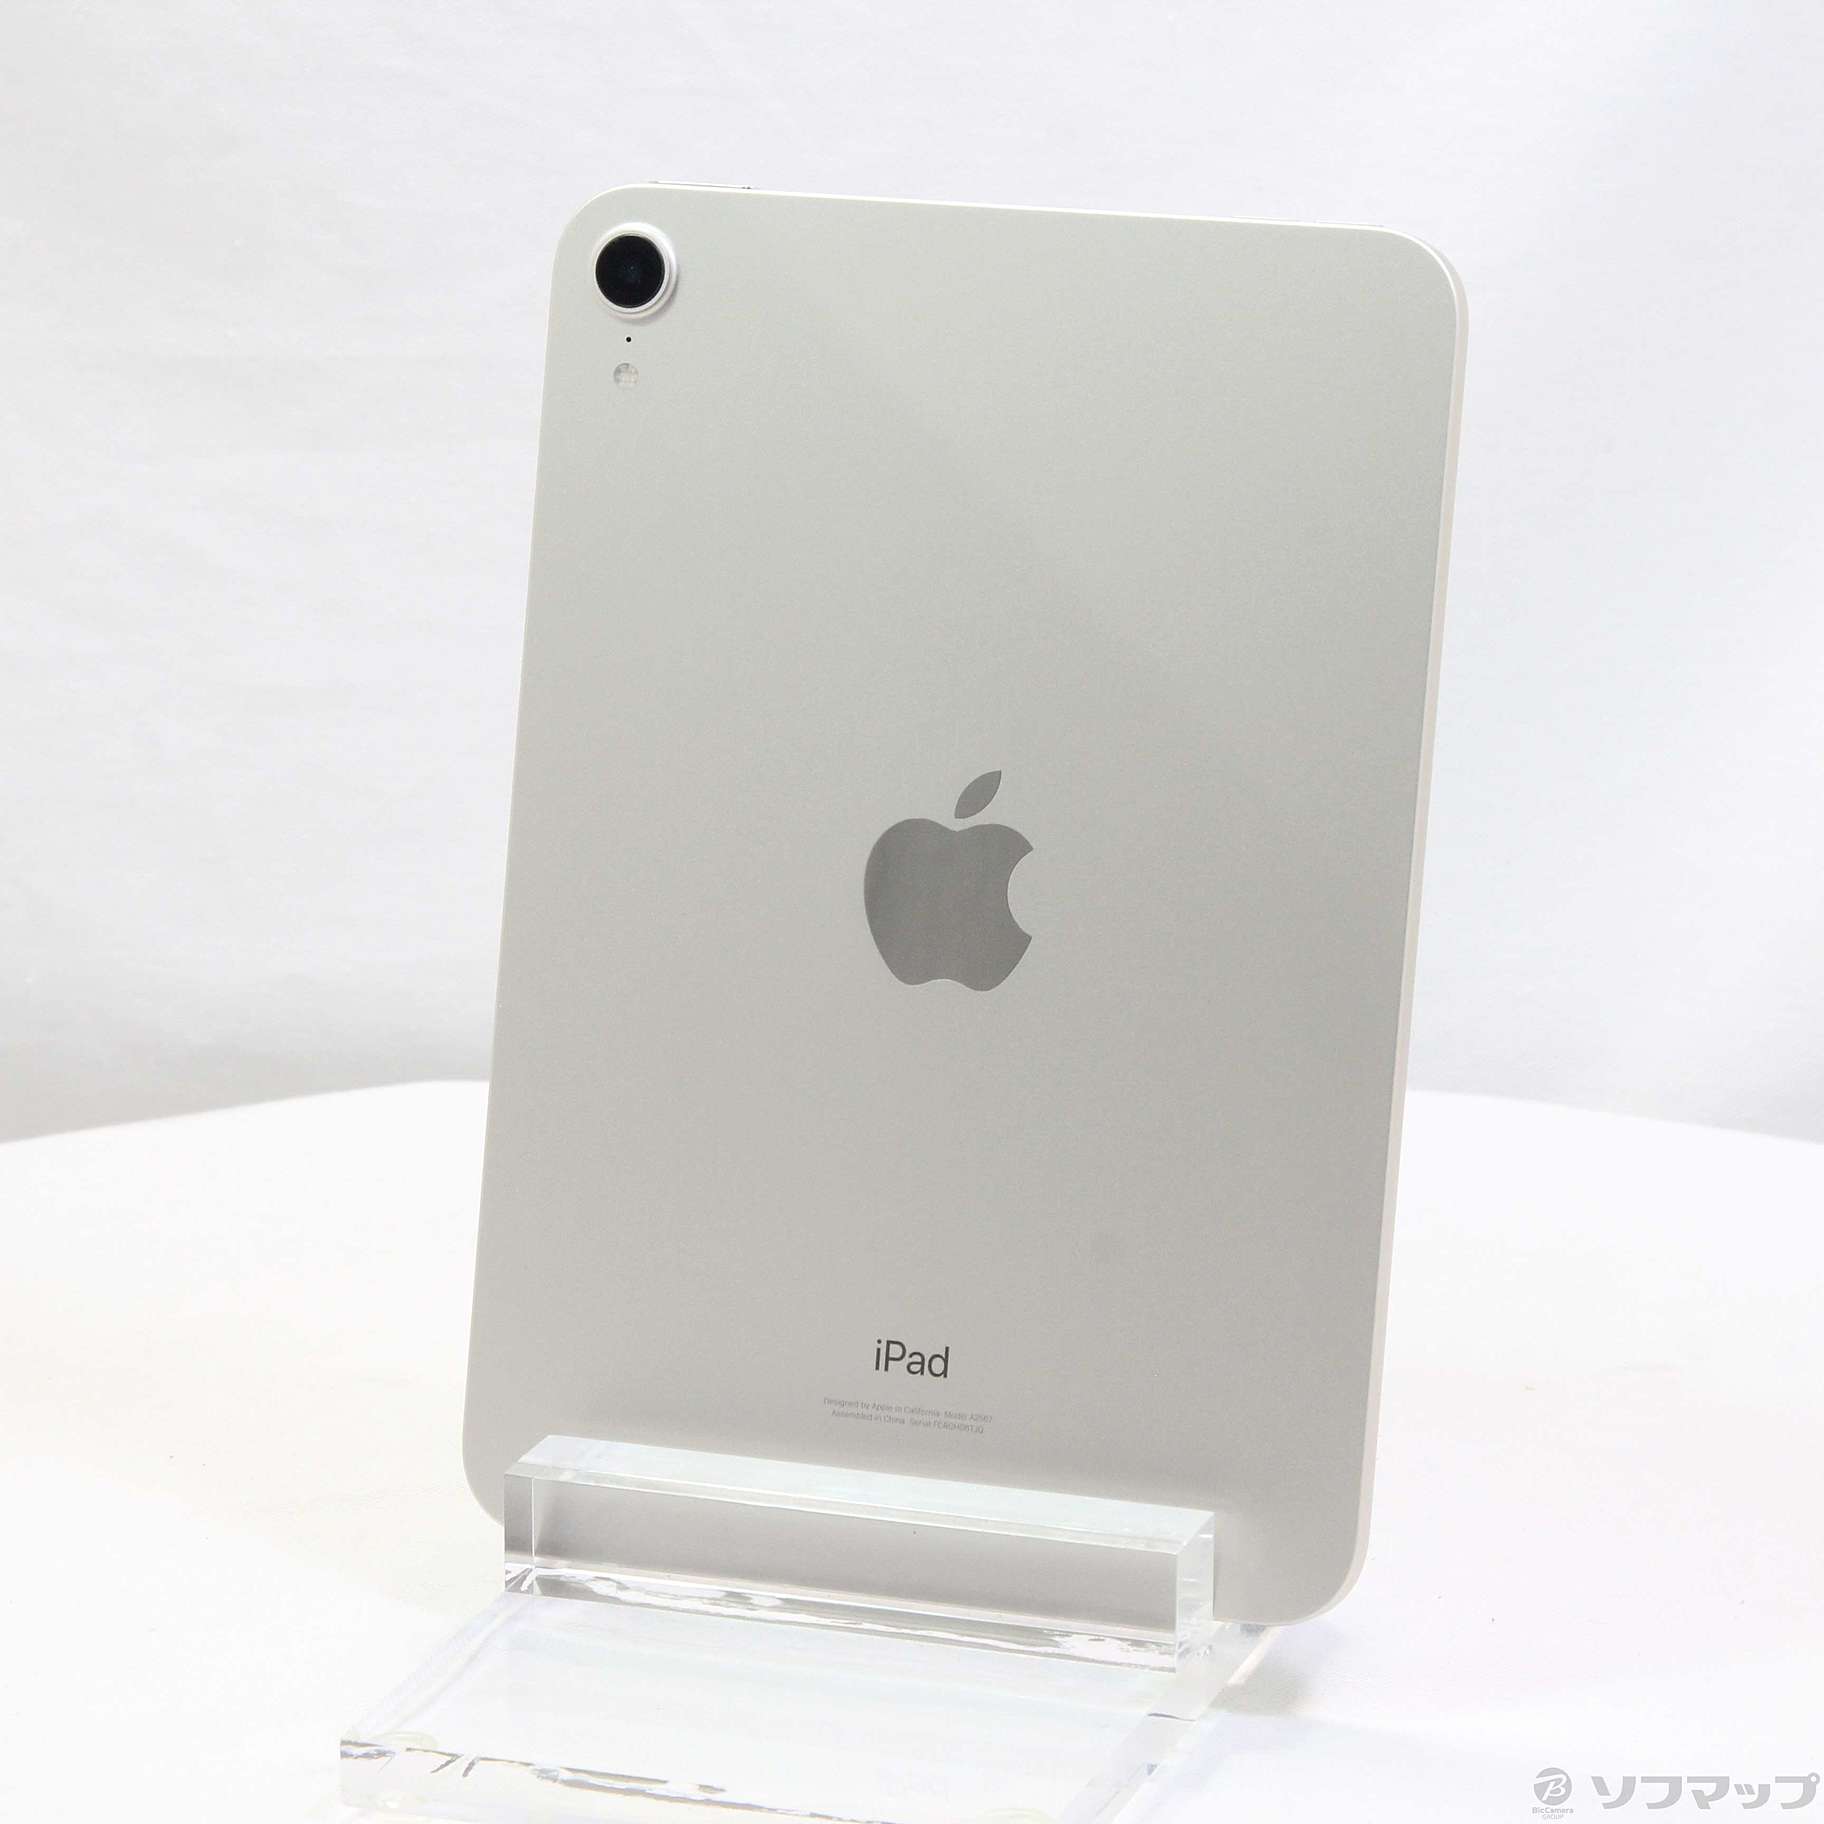 Redesigned iPad mini with Face ID brought to life in new concept | The Apple Post